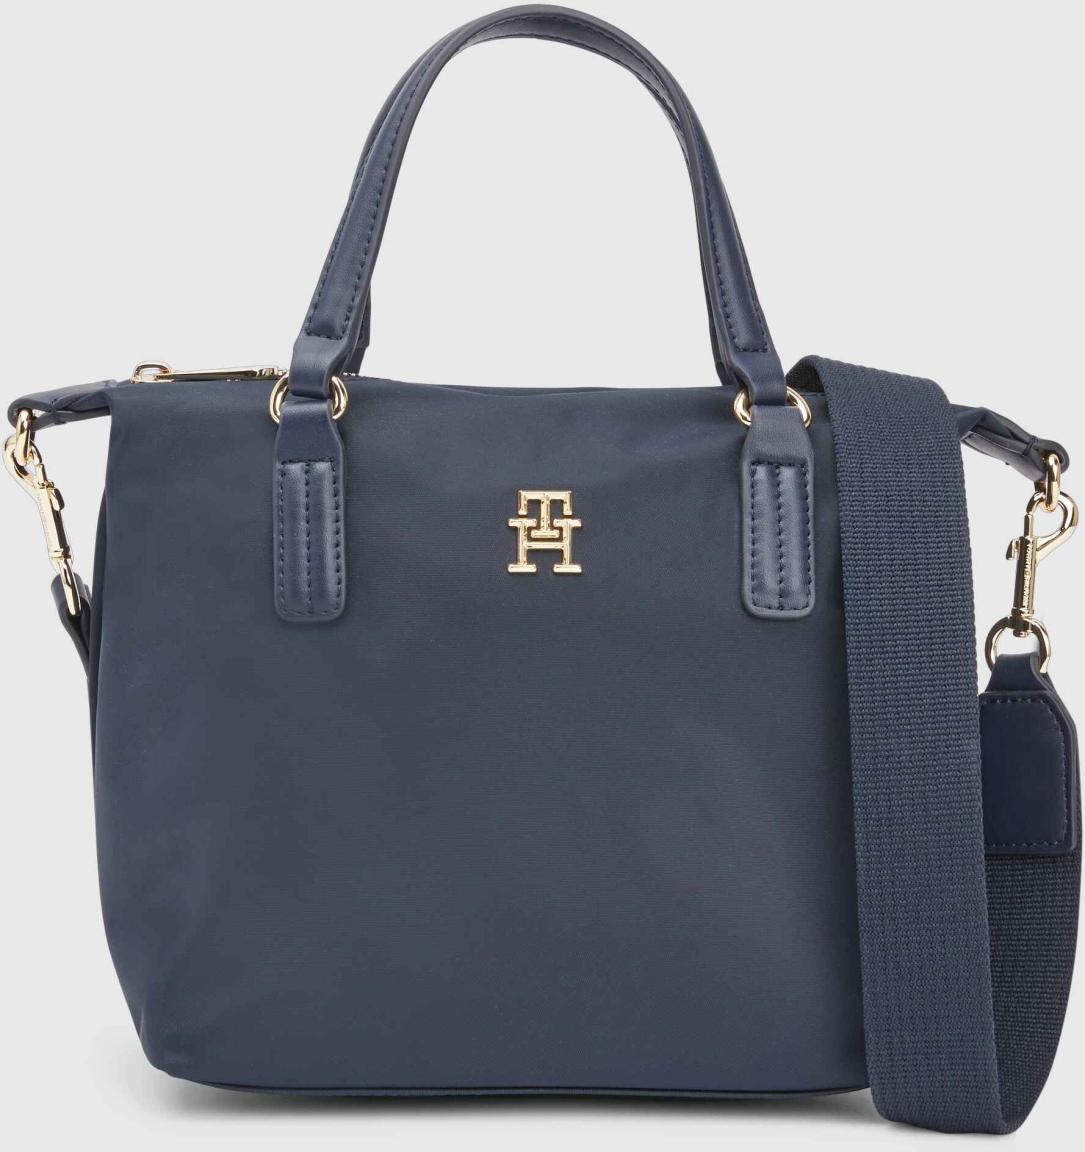 Damentasche Tommy Hilfiger Poppy Small Tote Space Blue